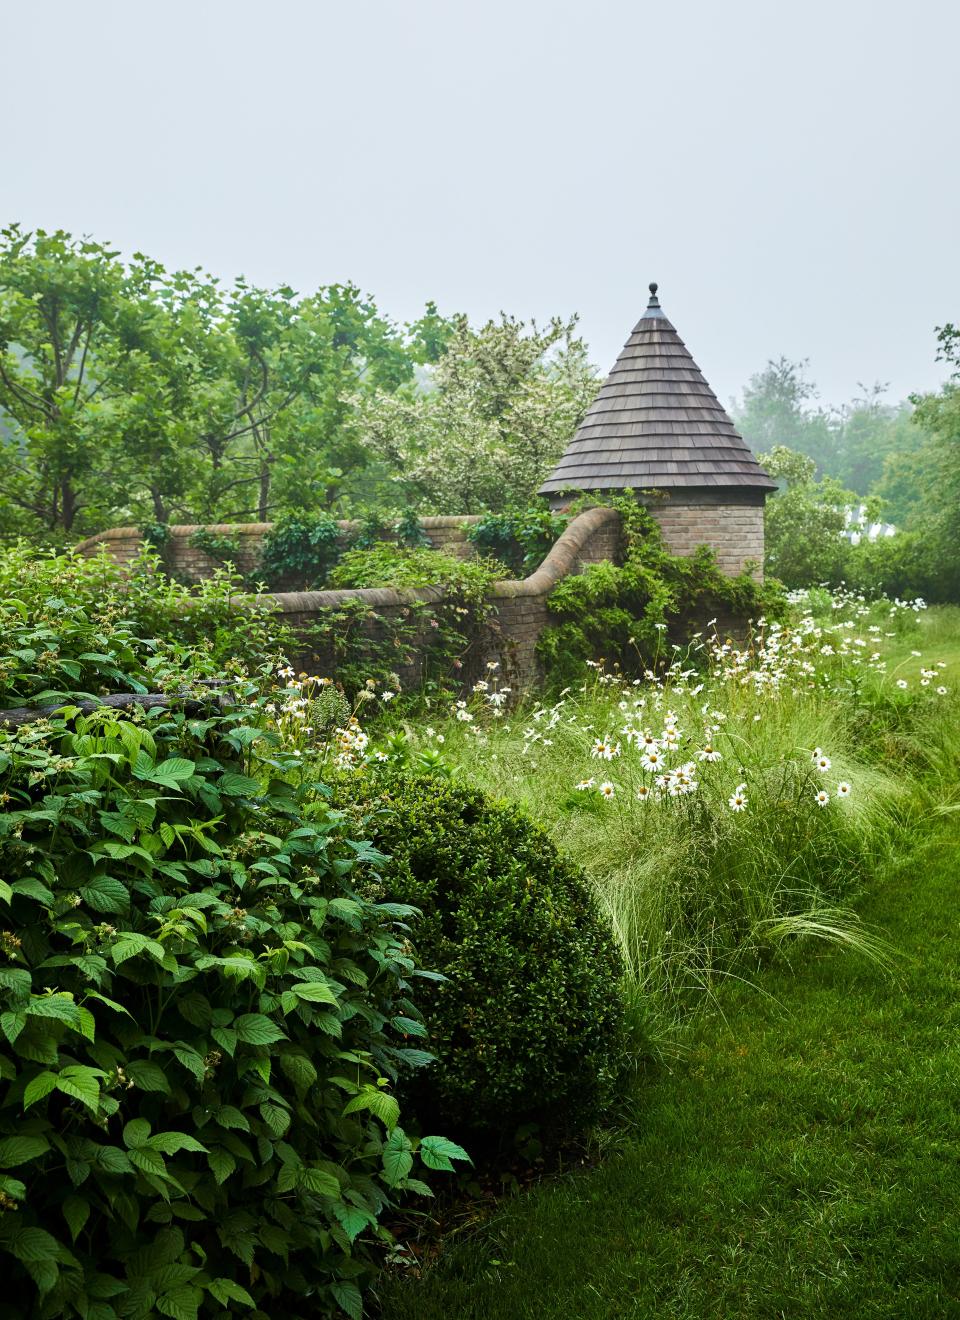 A thicket of daisies surrounds a garden wall anchored by a shingle-roofed turret.
Sittings Editor: Miranda Brooks